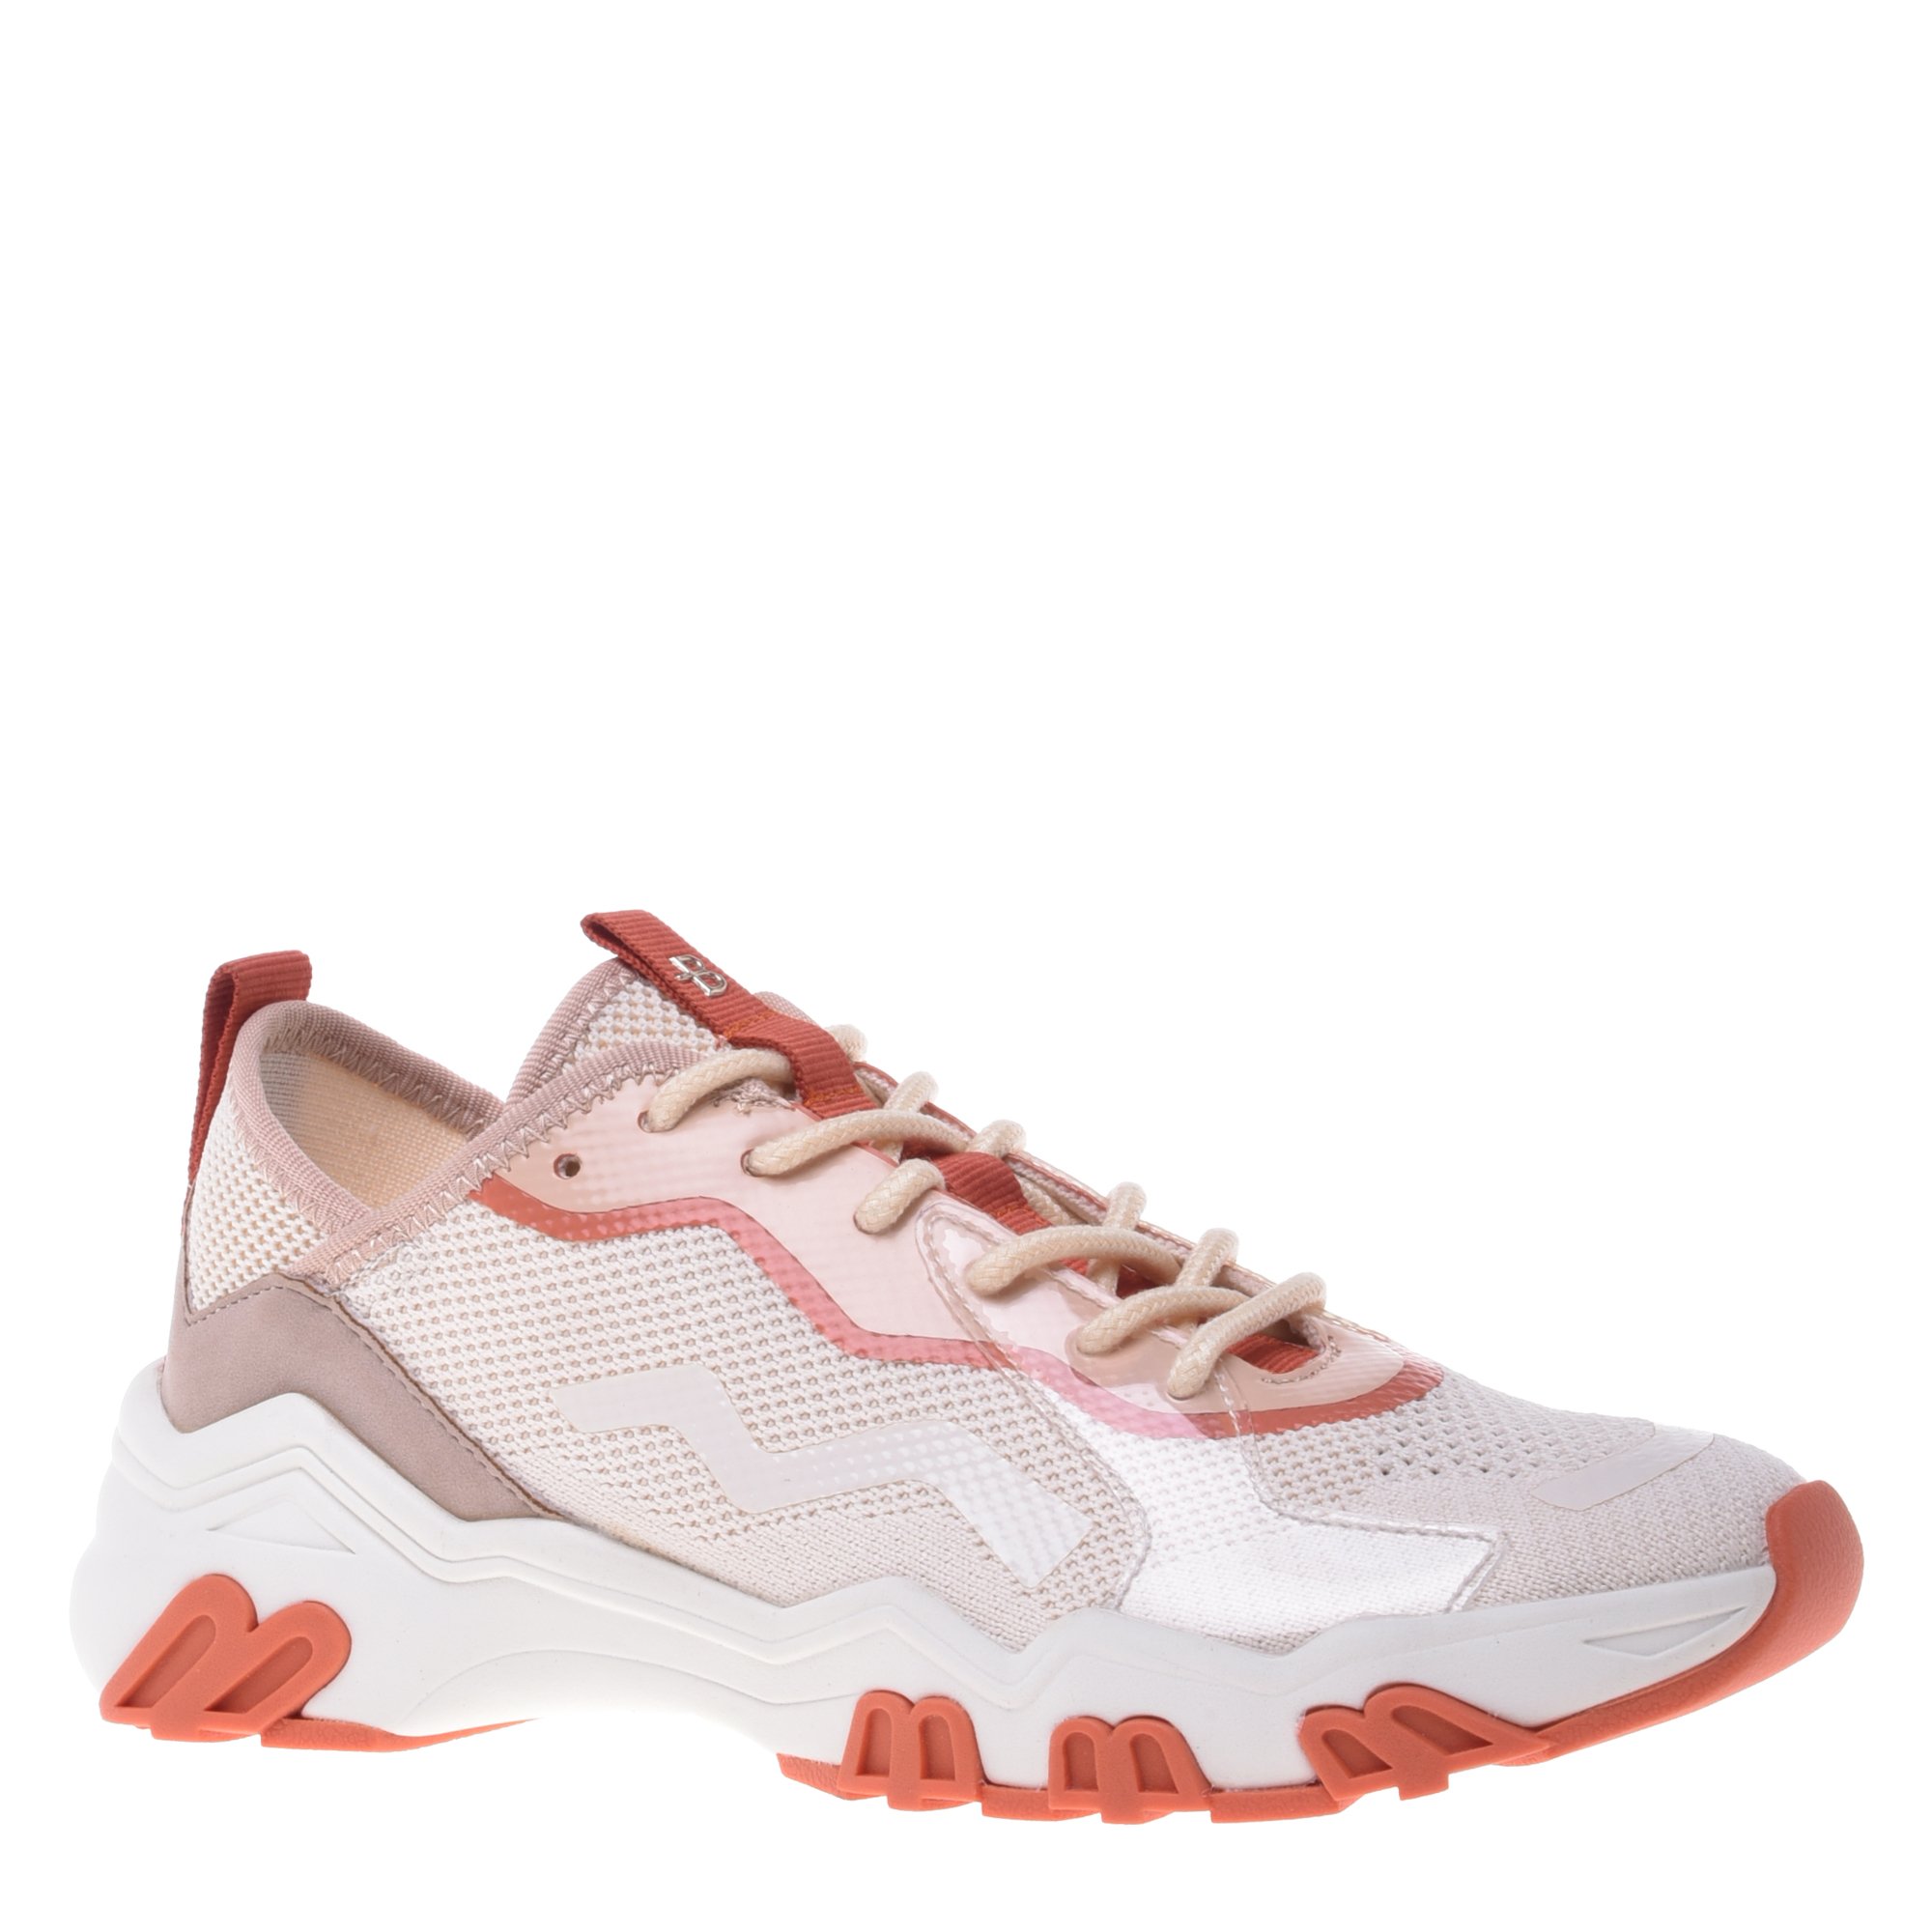 Sneaker in orange and pink eco-leather image